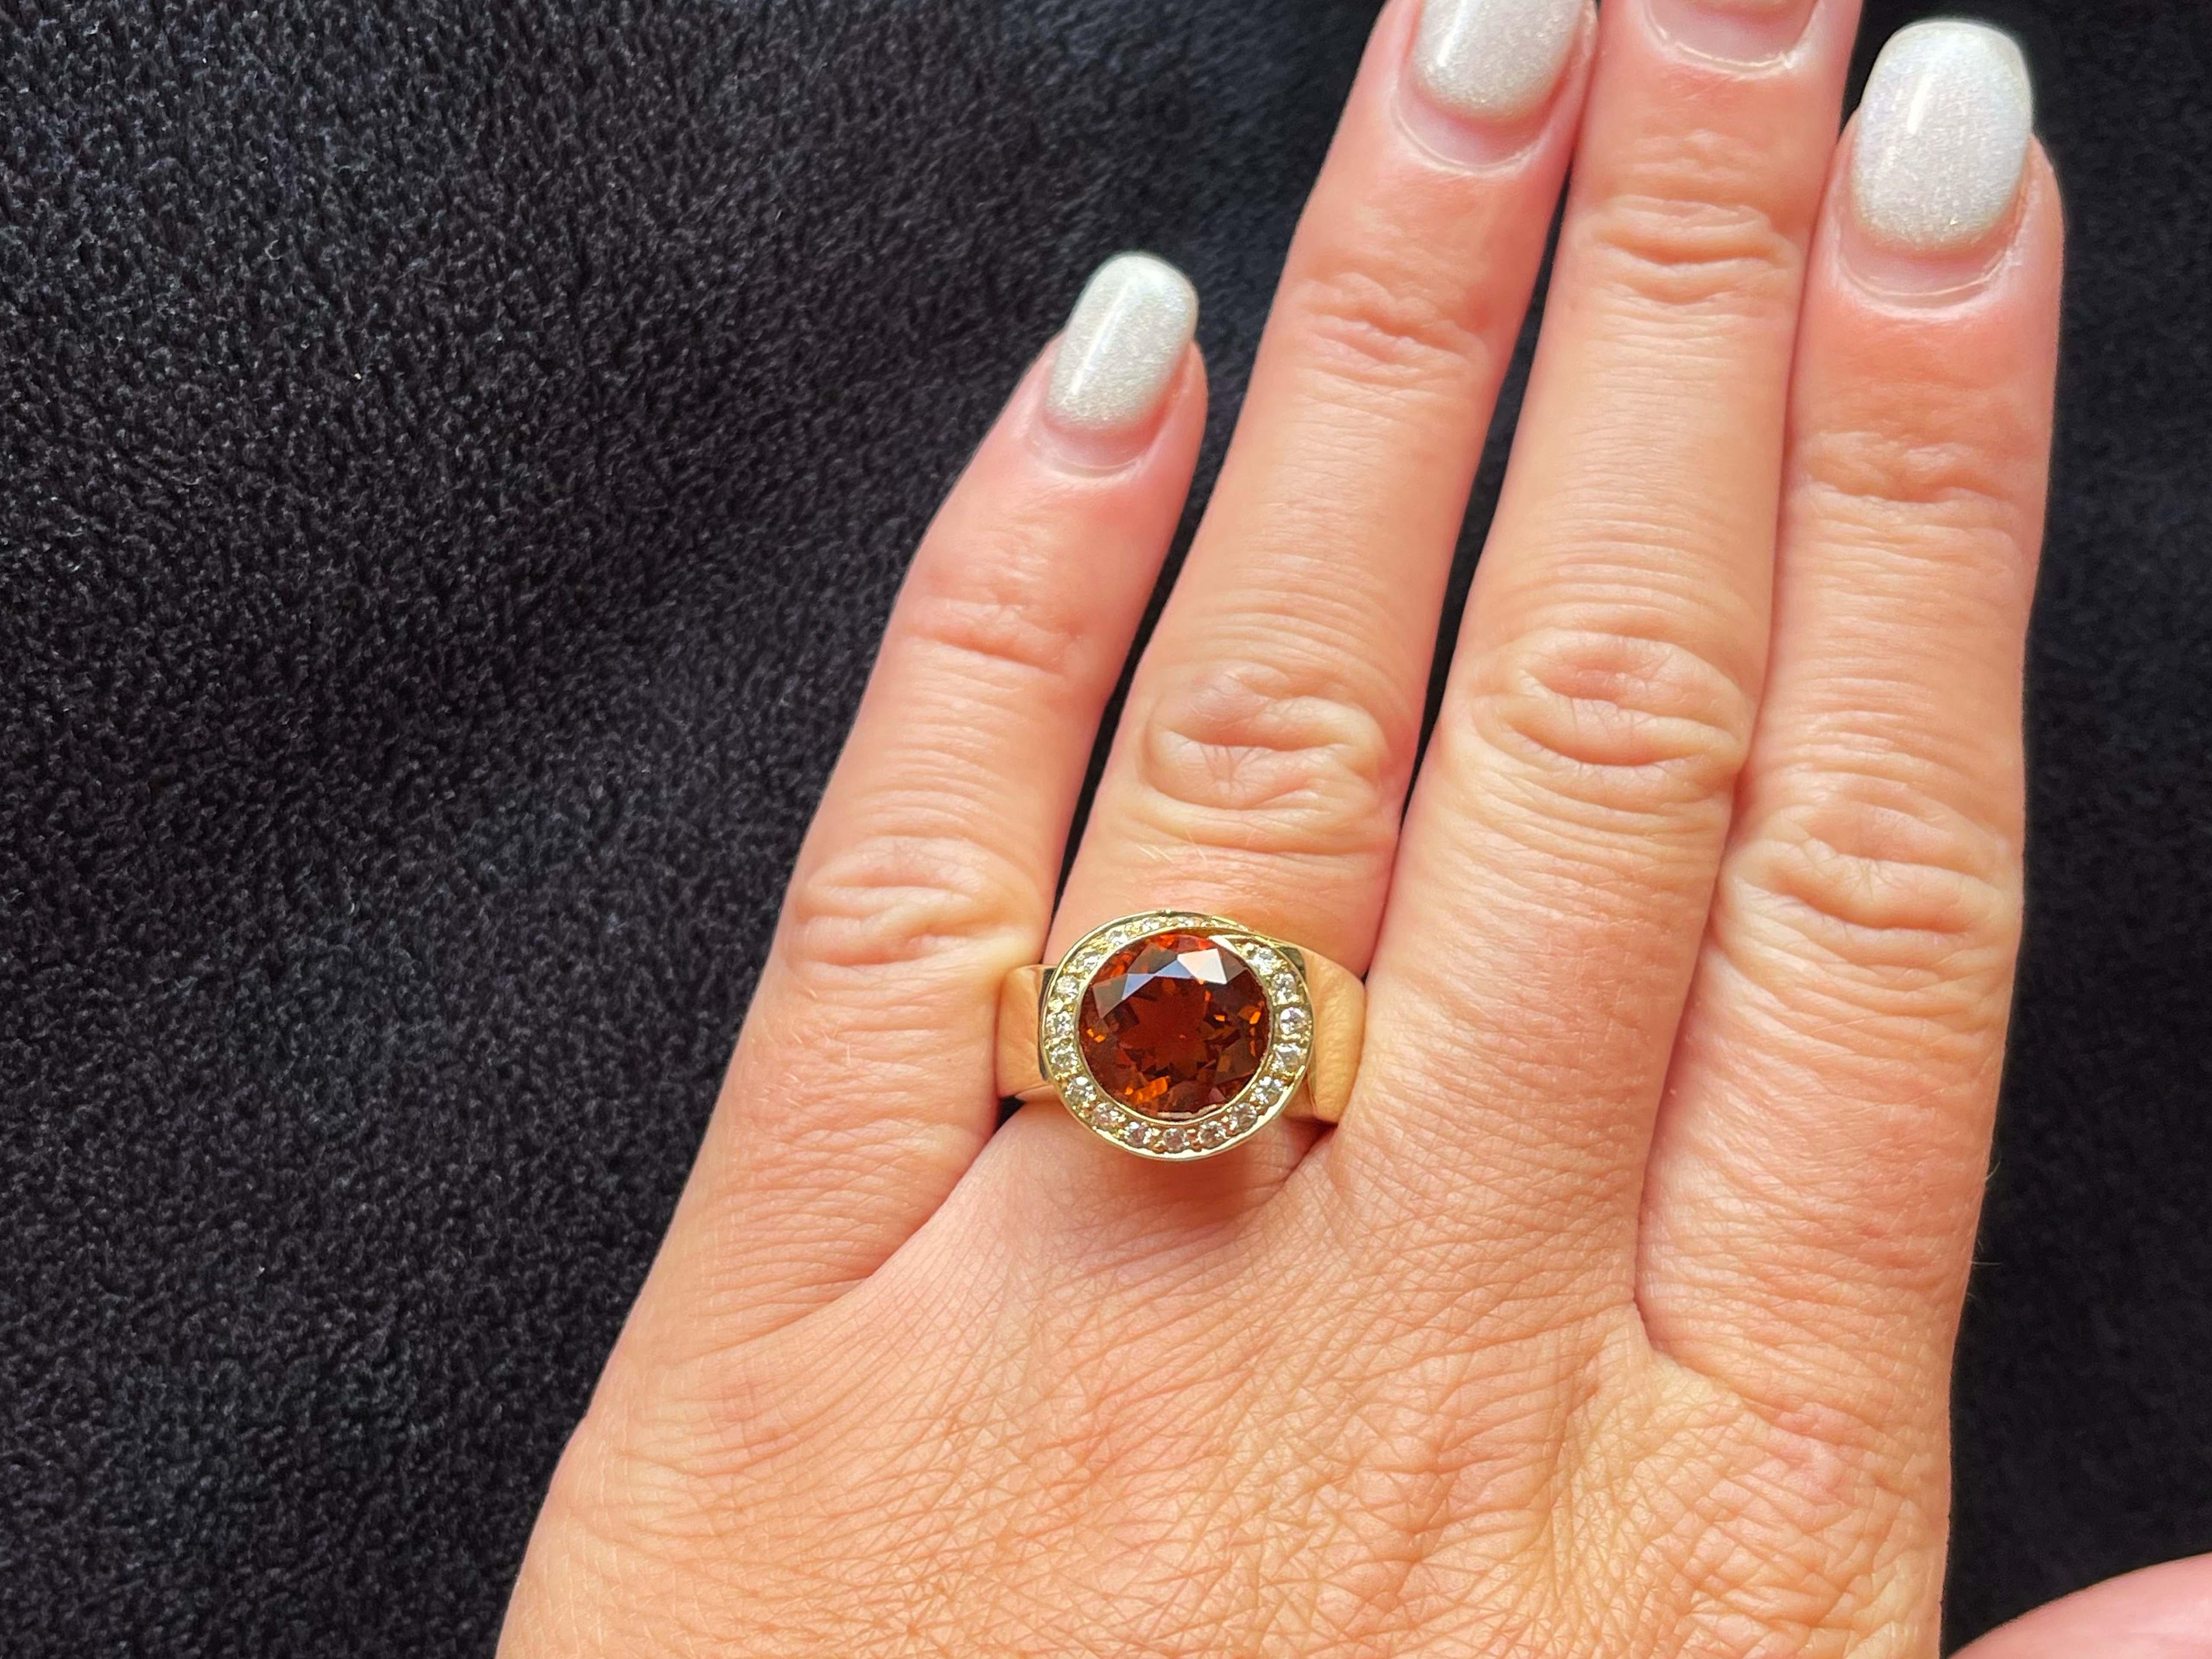 Item Specifications:

Metal: 14k Yellow Gold

Style: Statement Ring

Ring Size: 6.25 (resizing available for a fee)

Total Weight: 9.7 Grams

Gemstone Specifications: Citrine 
​
​Citrine Gemstone Measurements: 10.7 mm x 10.2 mm x 6.6 mm 

Citrine